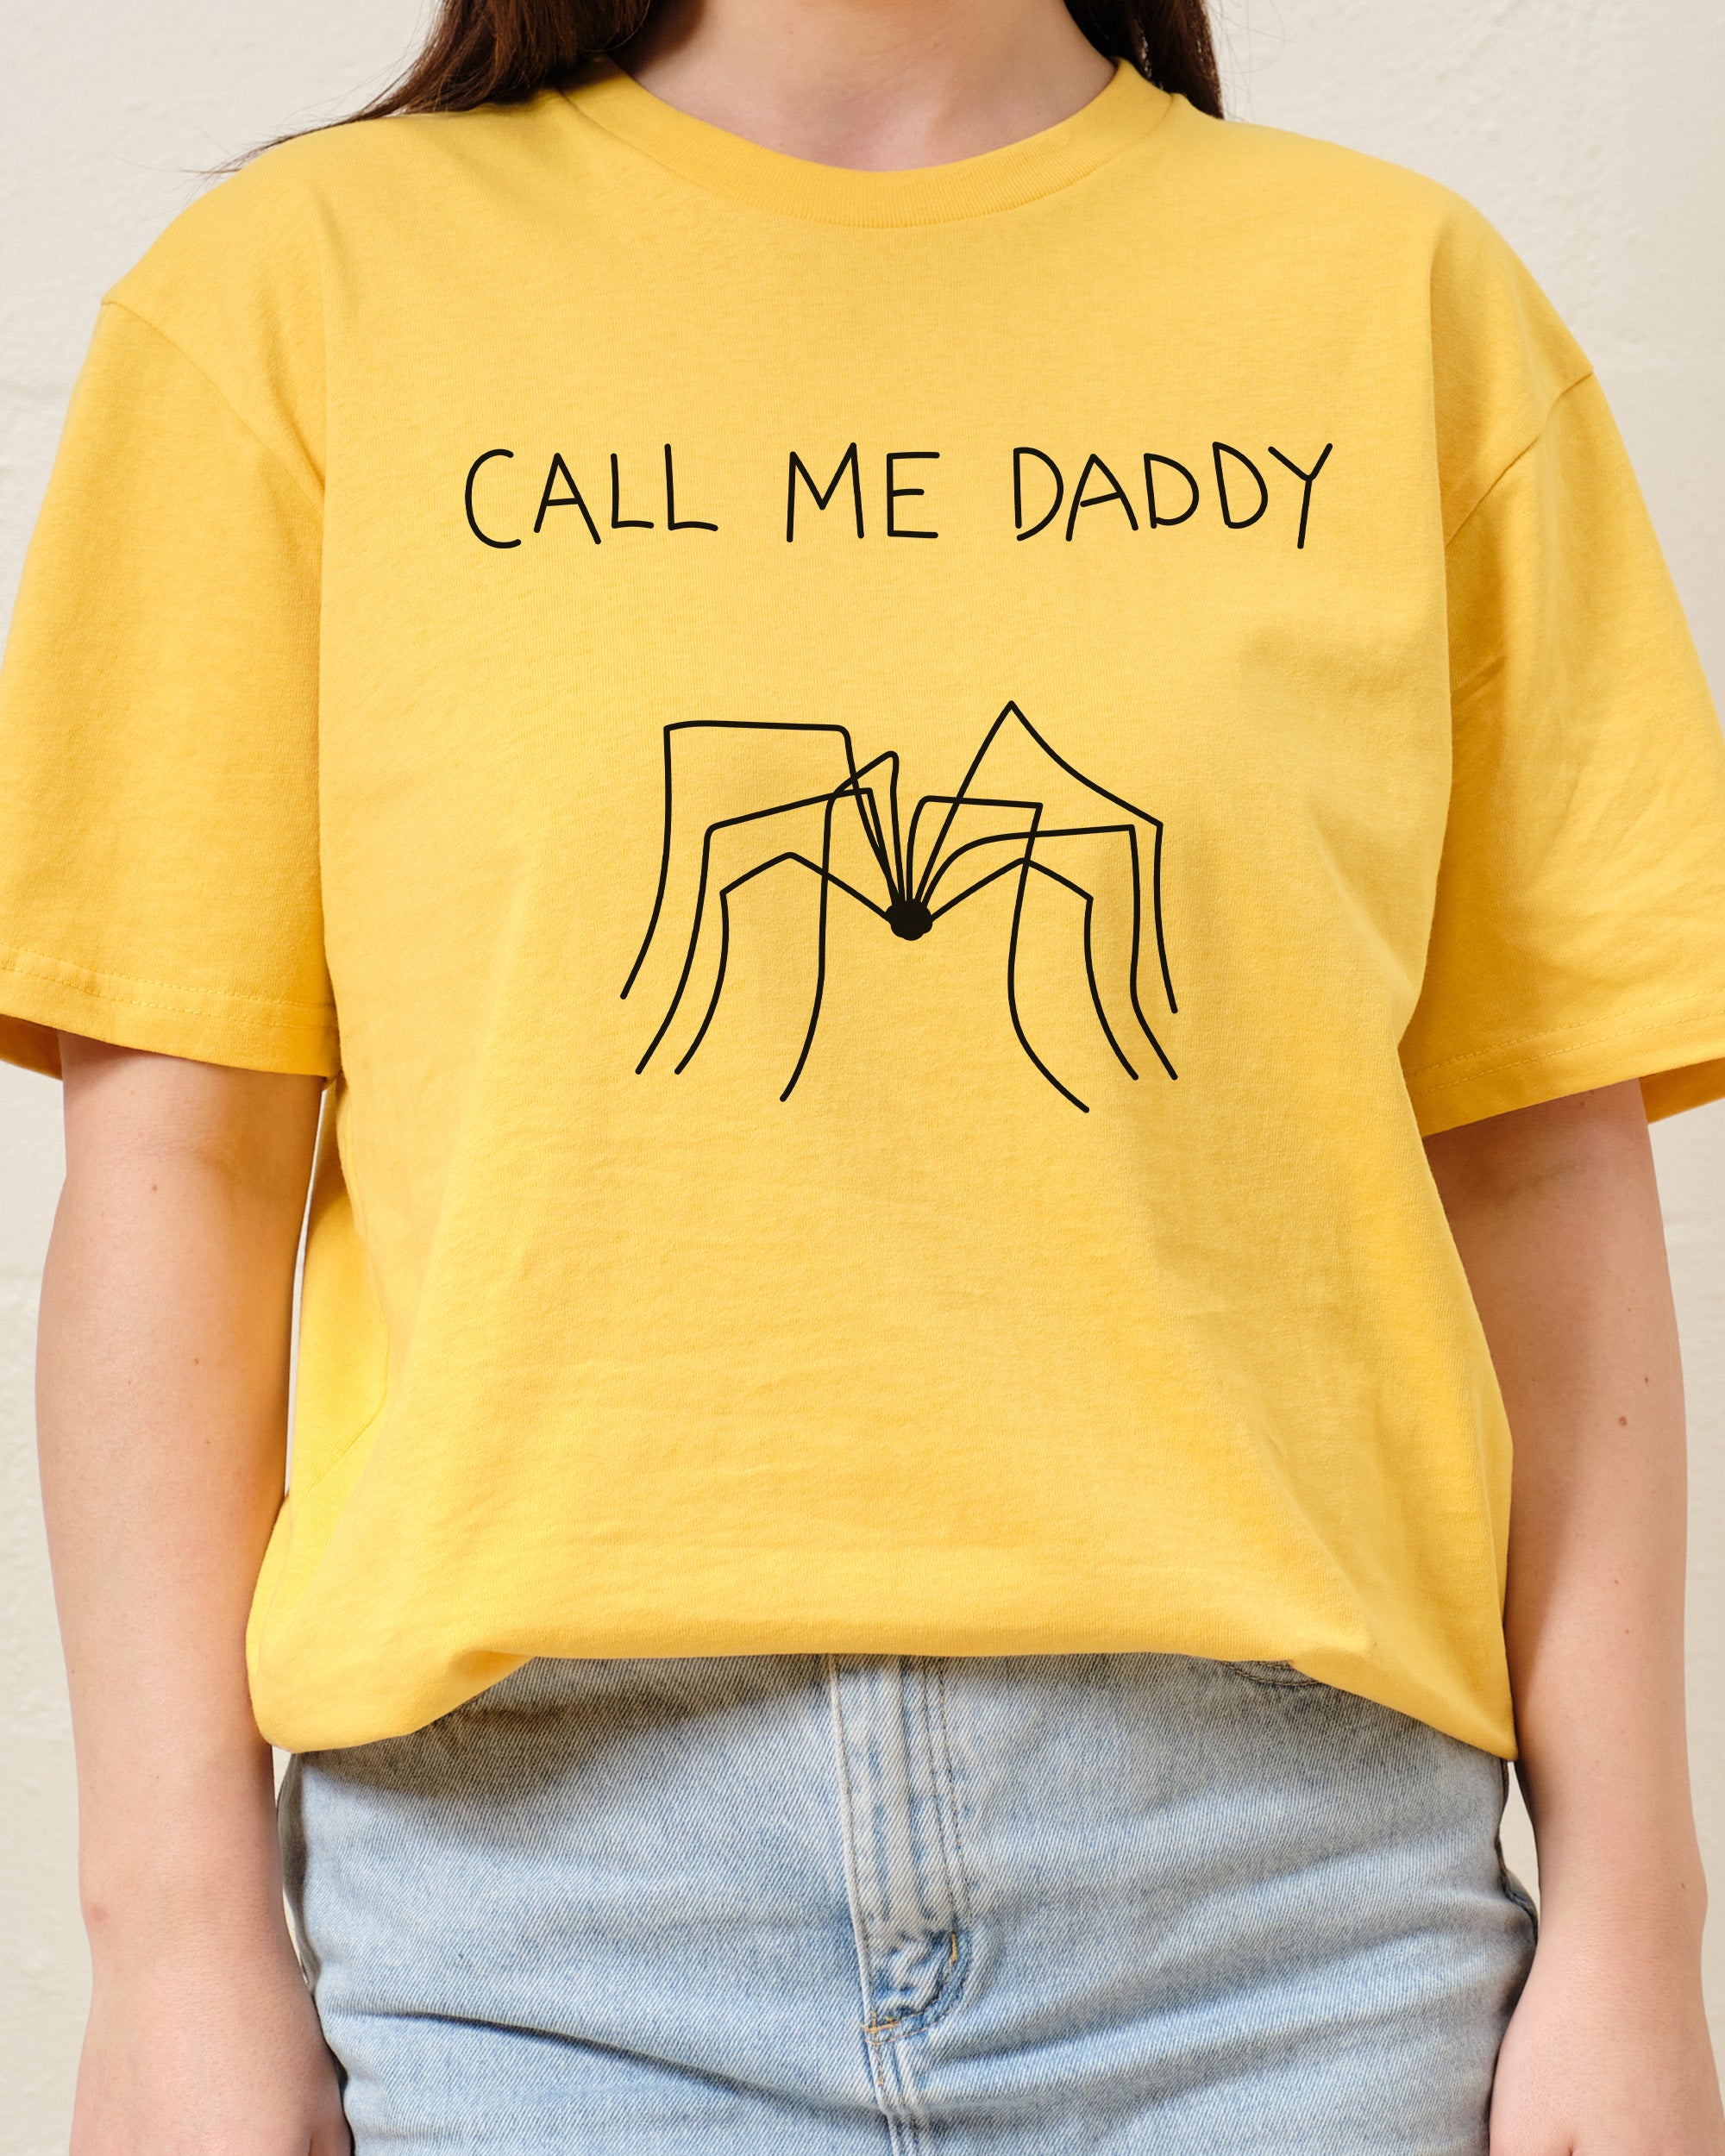 Who's Your Daddy T-Shirt Australia Online